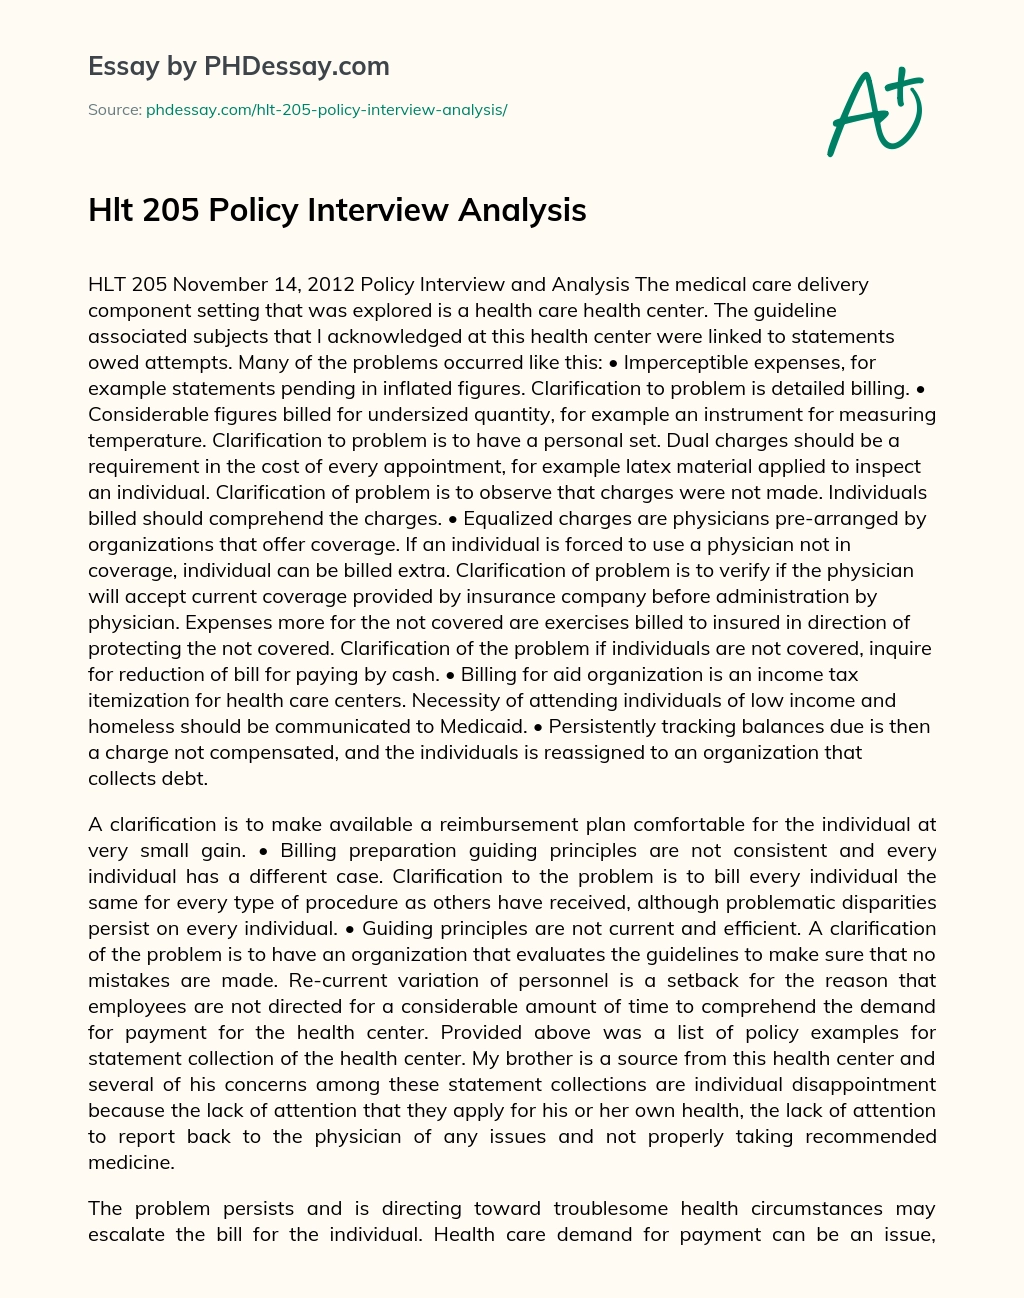 Hlt 205 Policy Interview Analysis essay